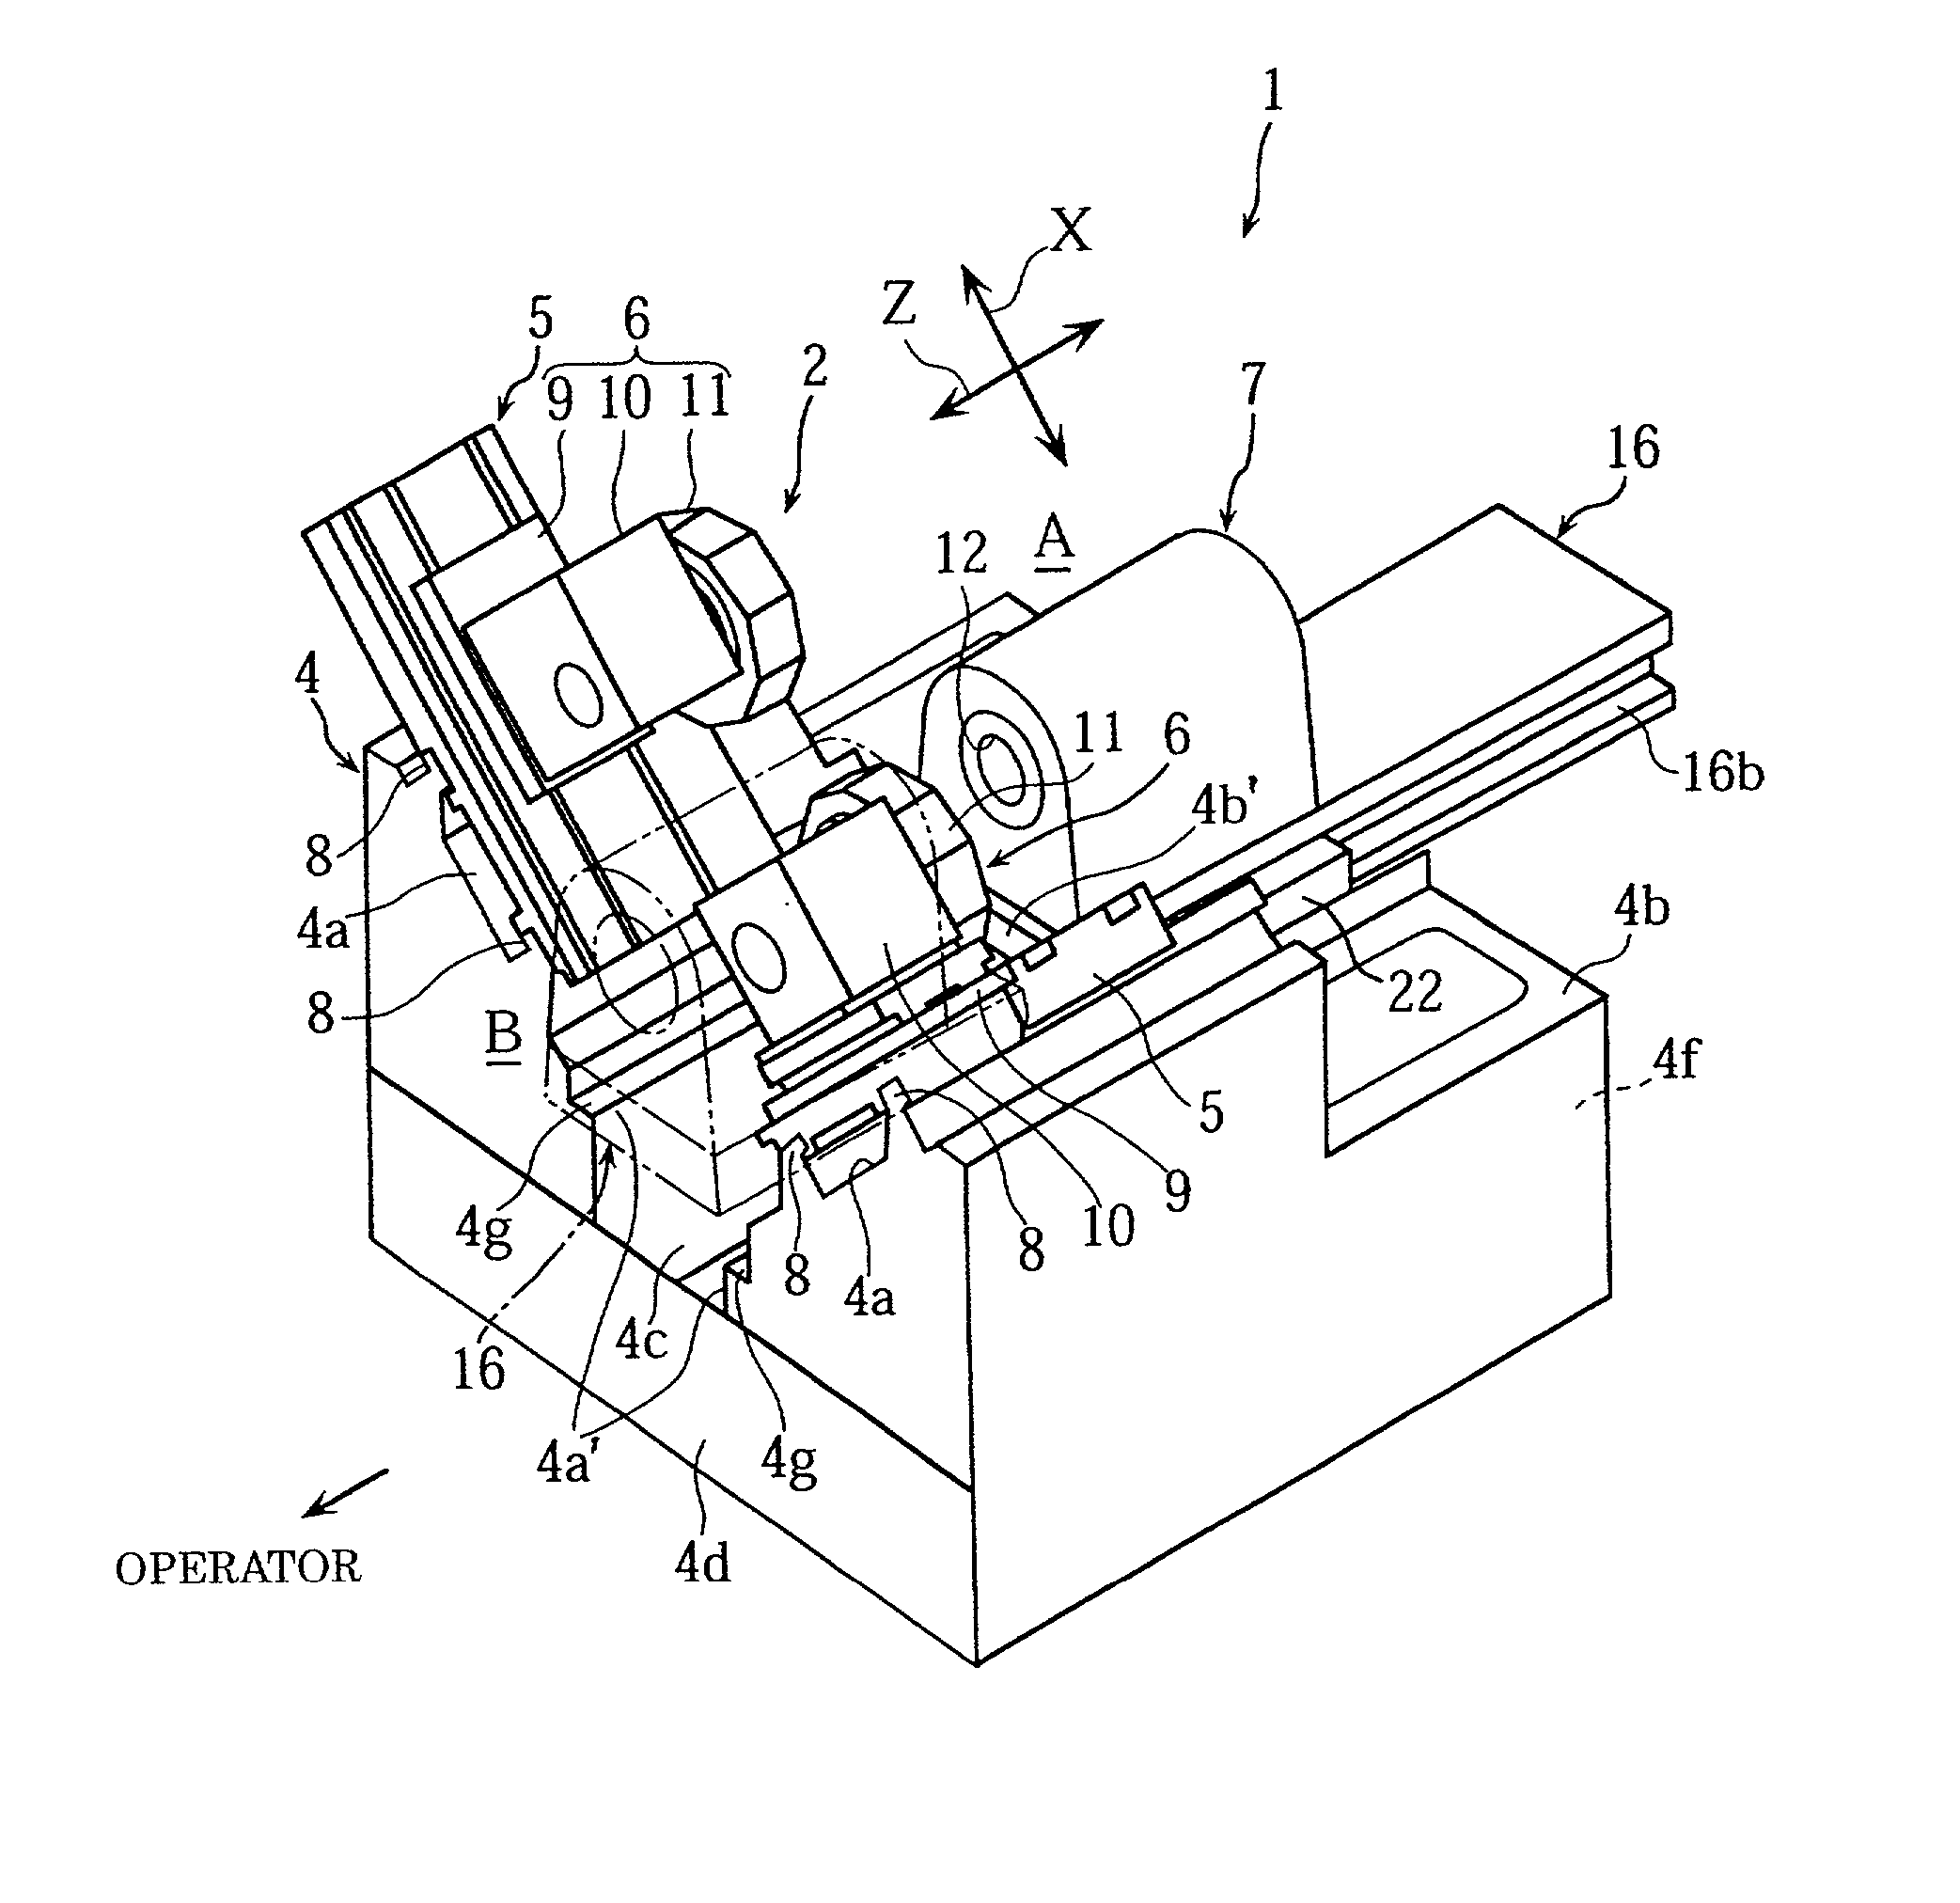 Headstock guide unit for a machine tool